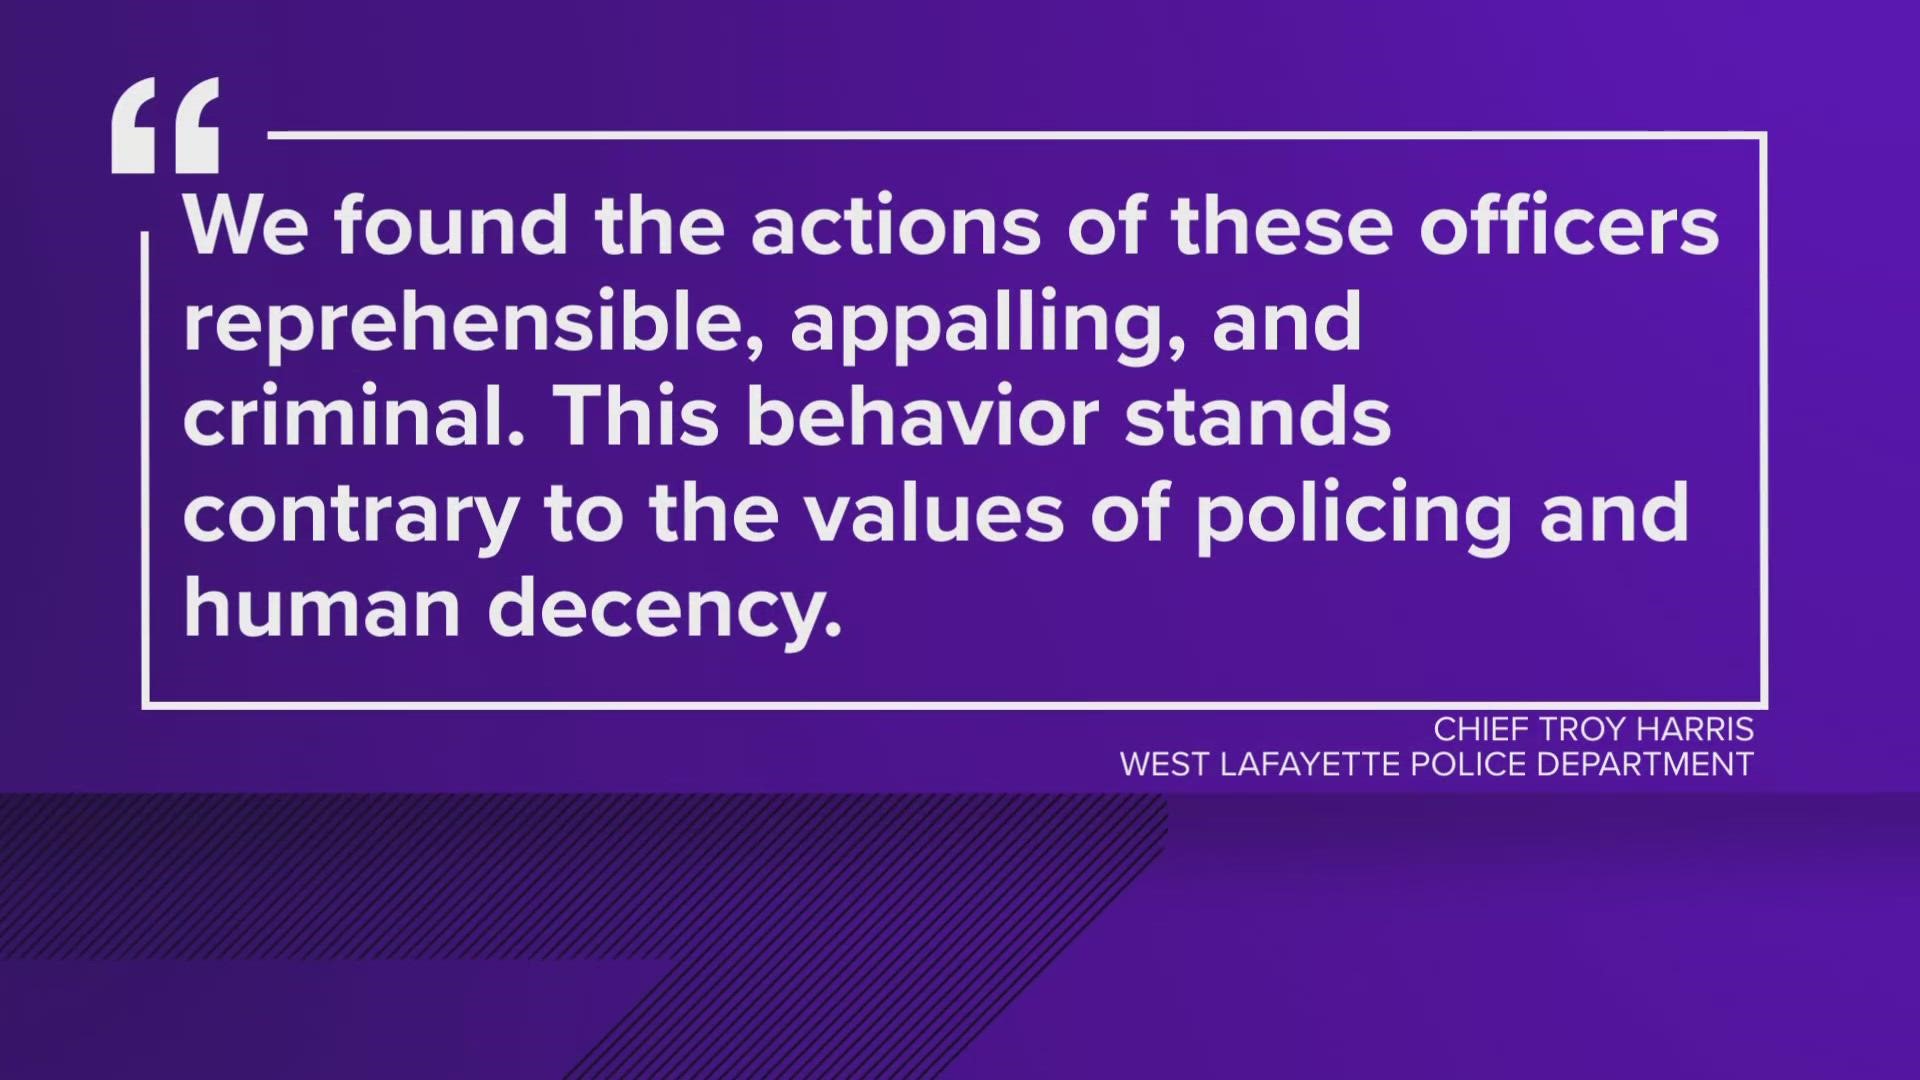 The West Lafayette Police Department released a statement saying the Memphis officers' "behavior stands contrary to the values of policing and human decency."